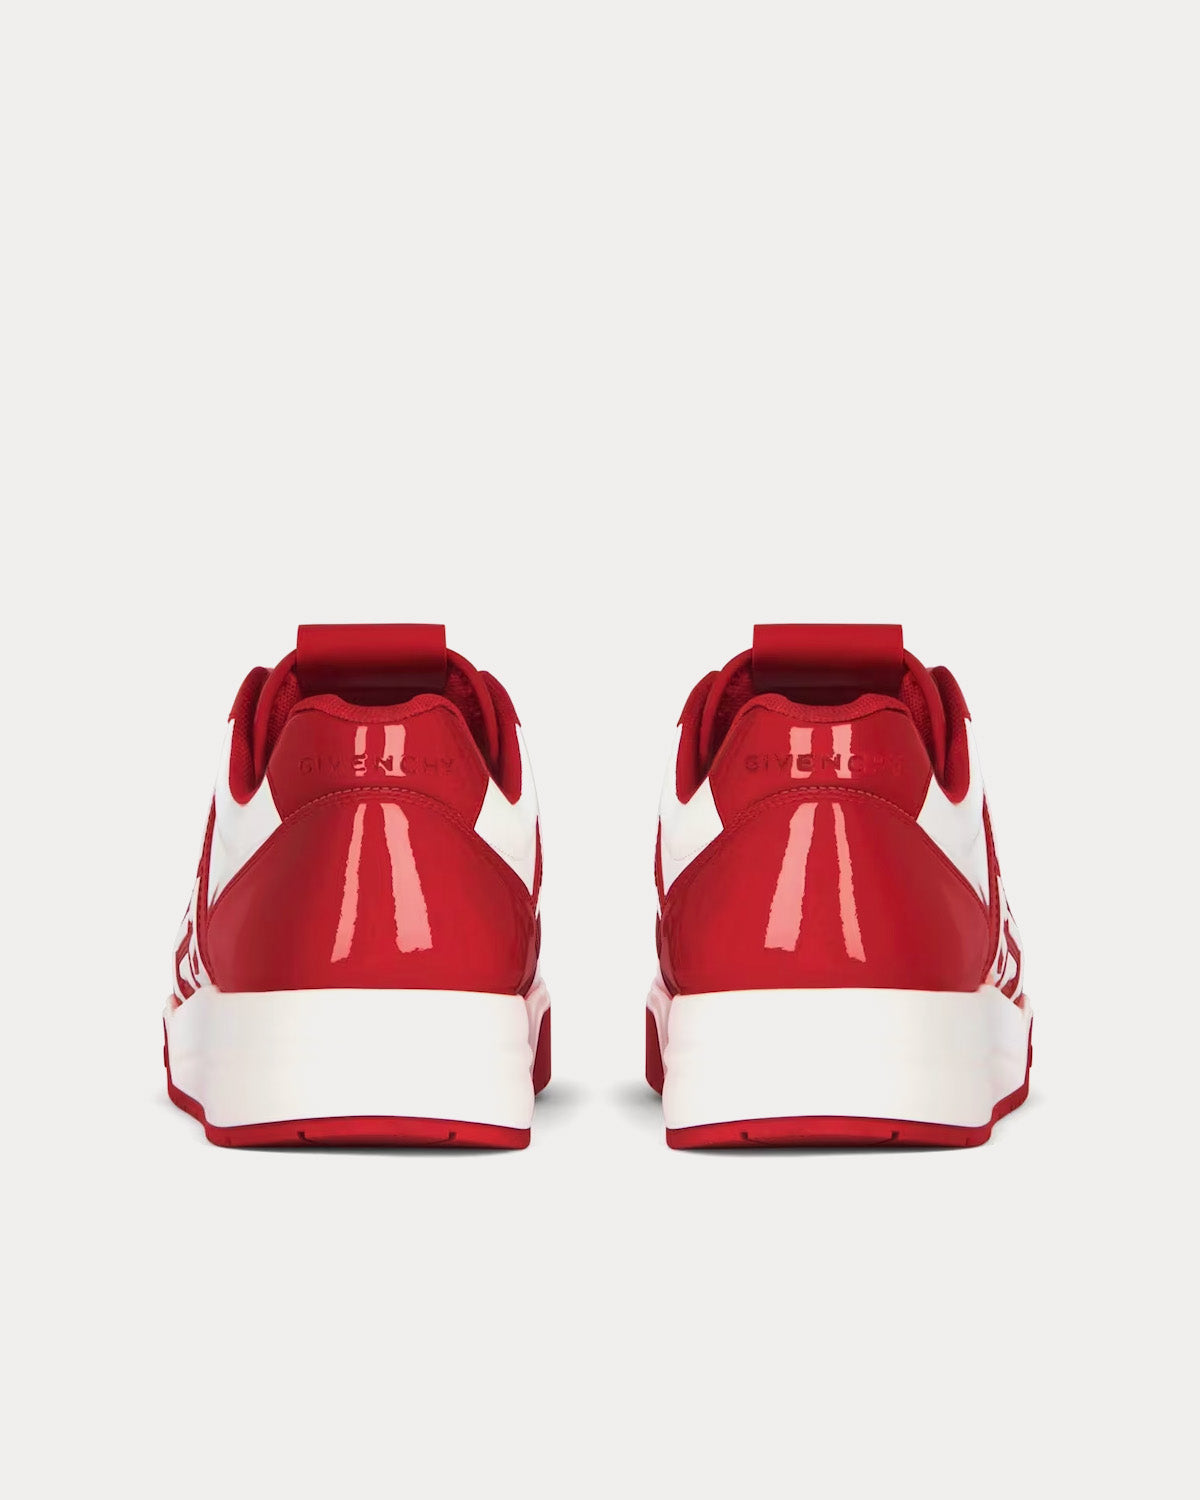 Givenchy - G4 Patent Leather Red / White Low Top Sneakers